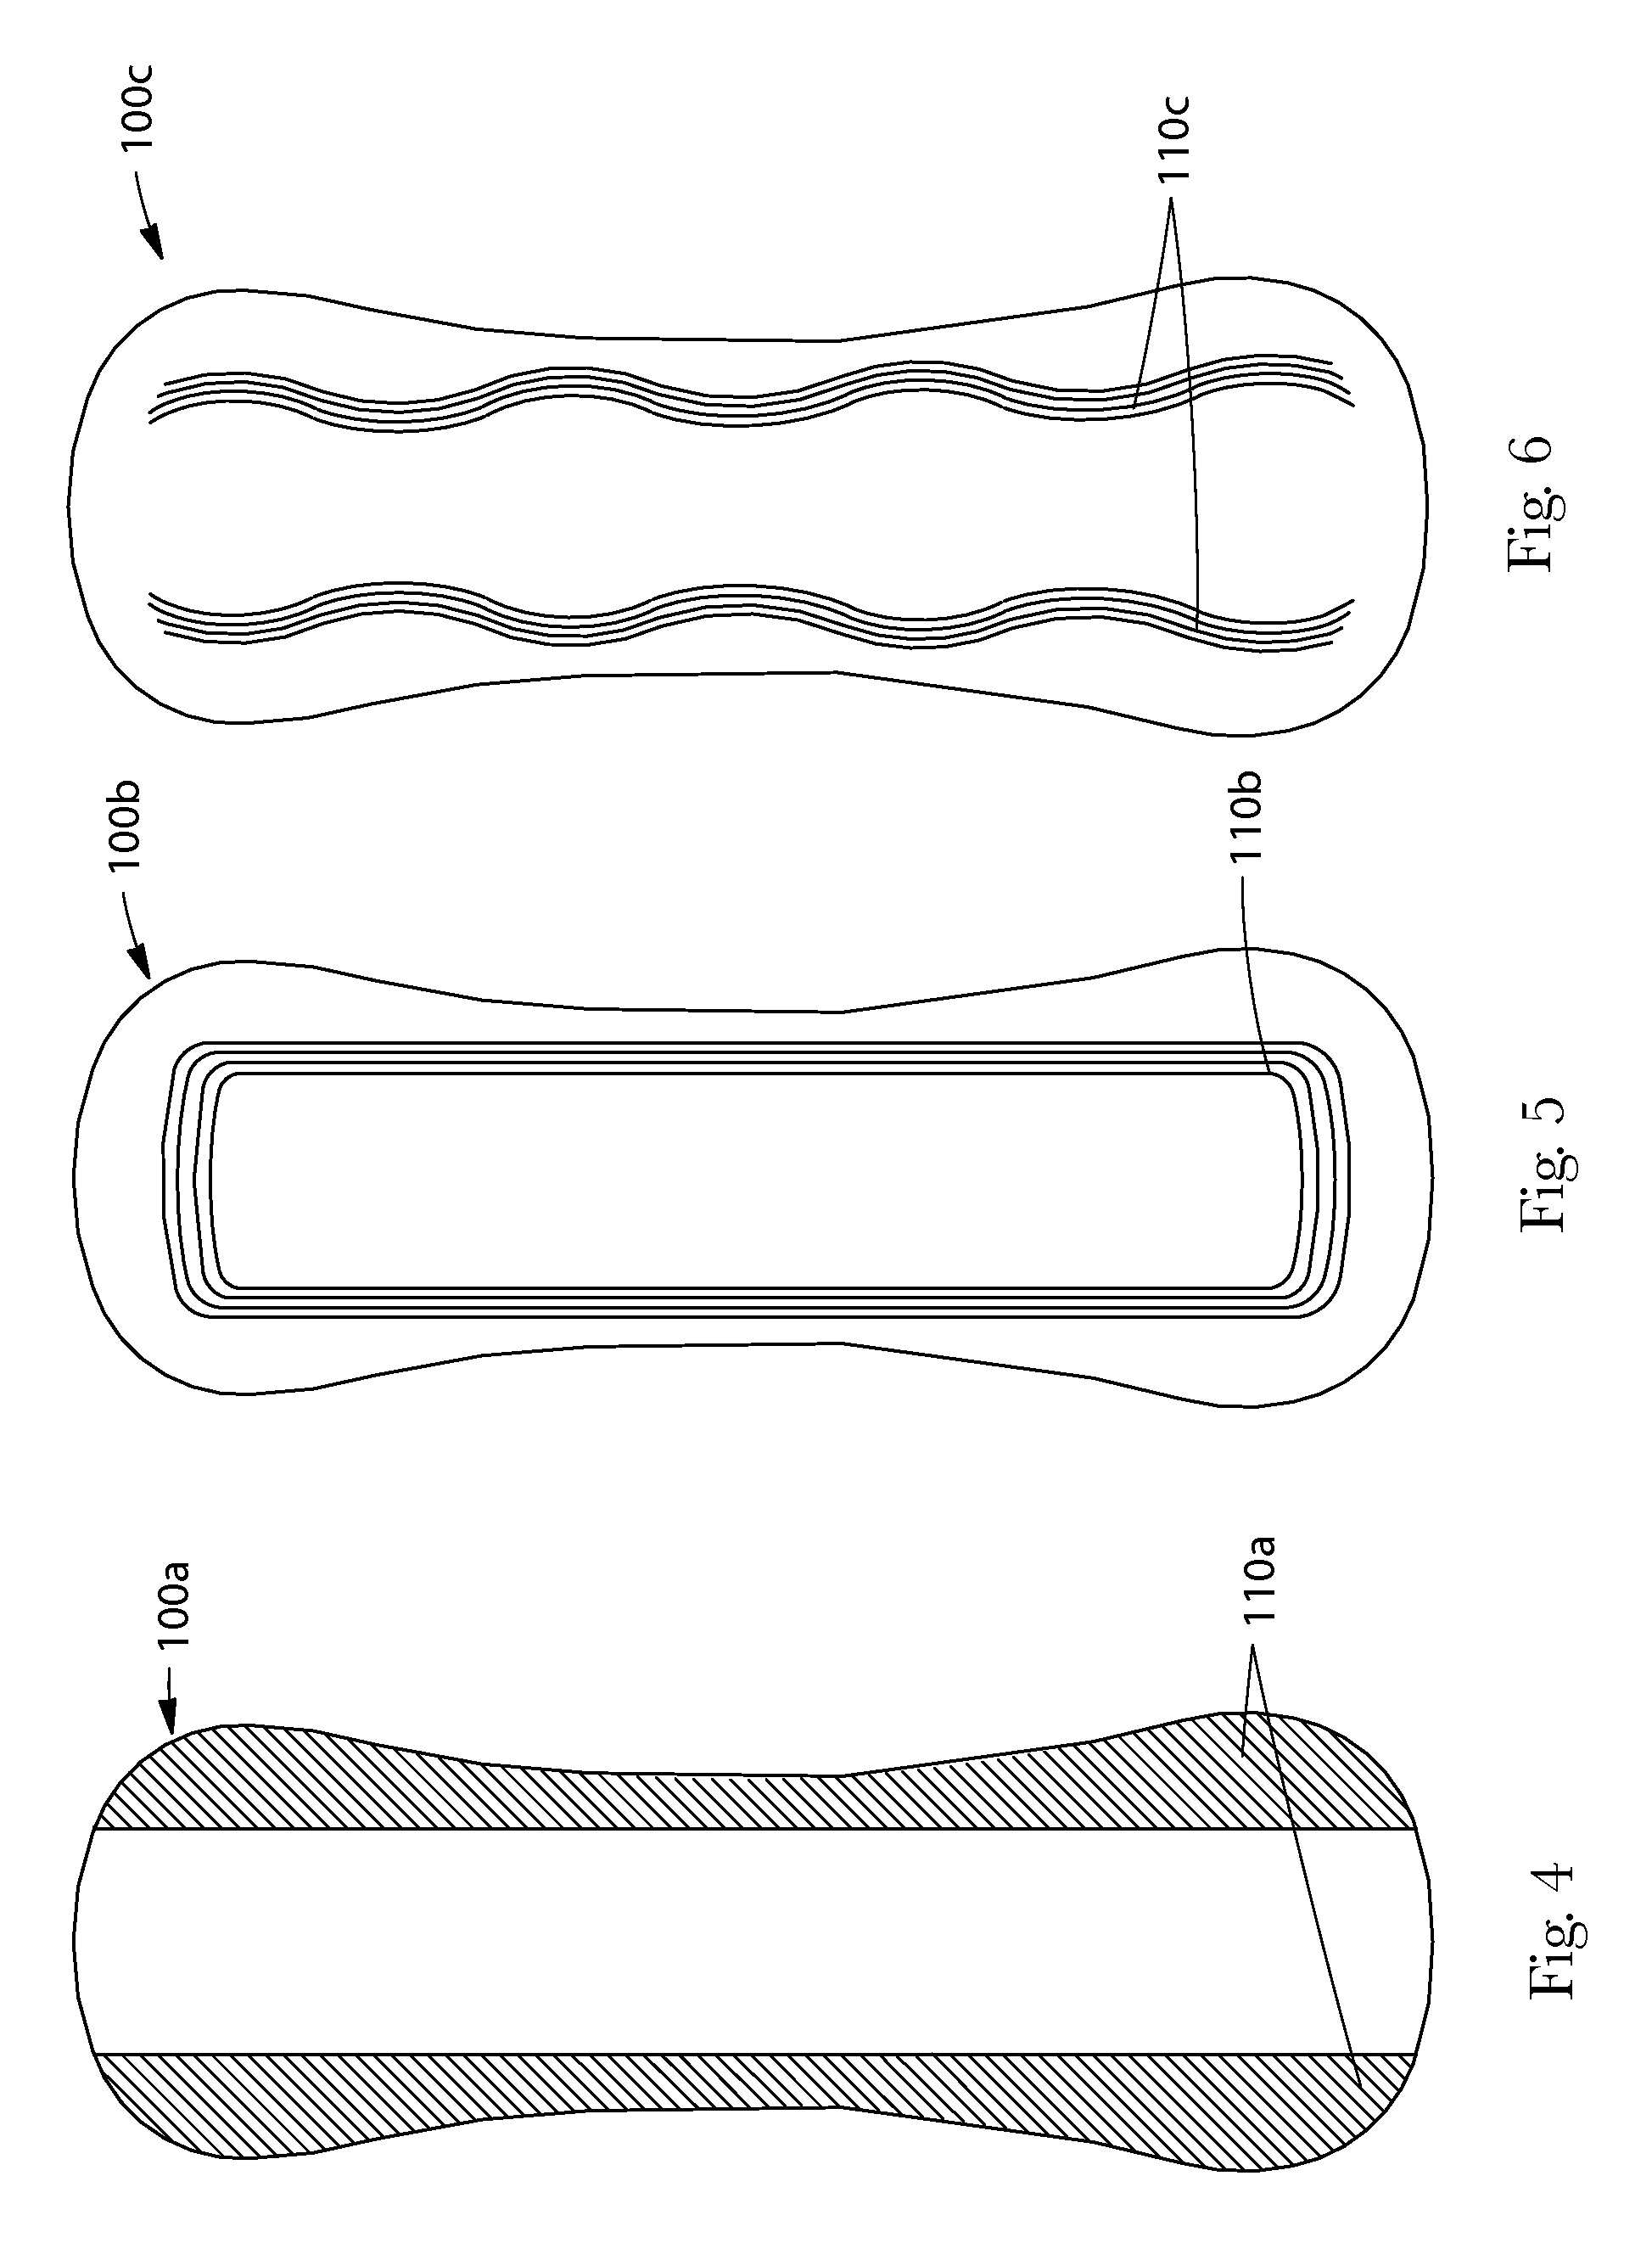 Method of producing color change in a substrate